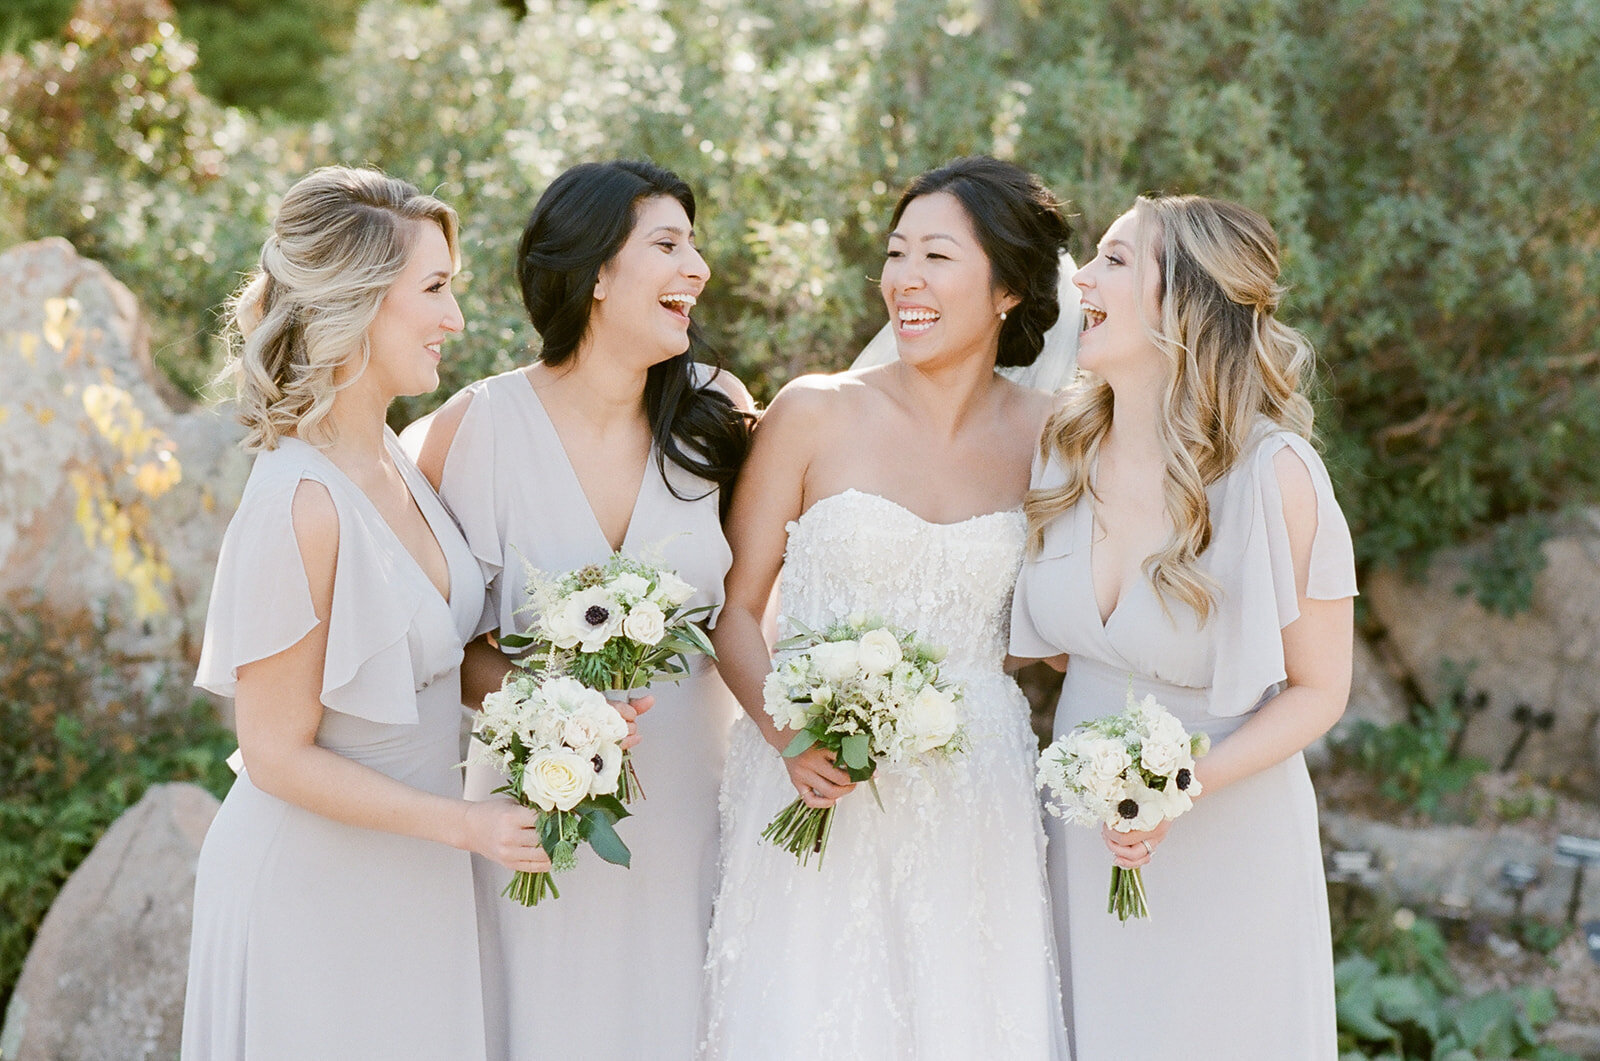 Bride and bridesmaids holding bouquets and laughing in front of trees